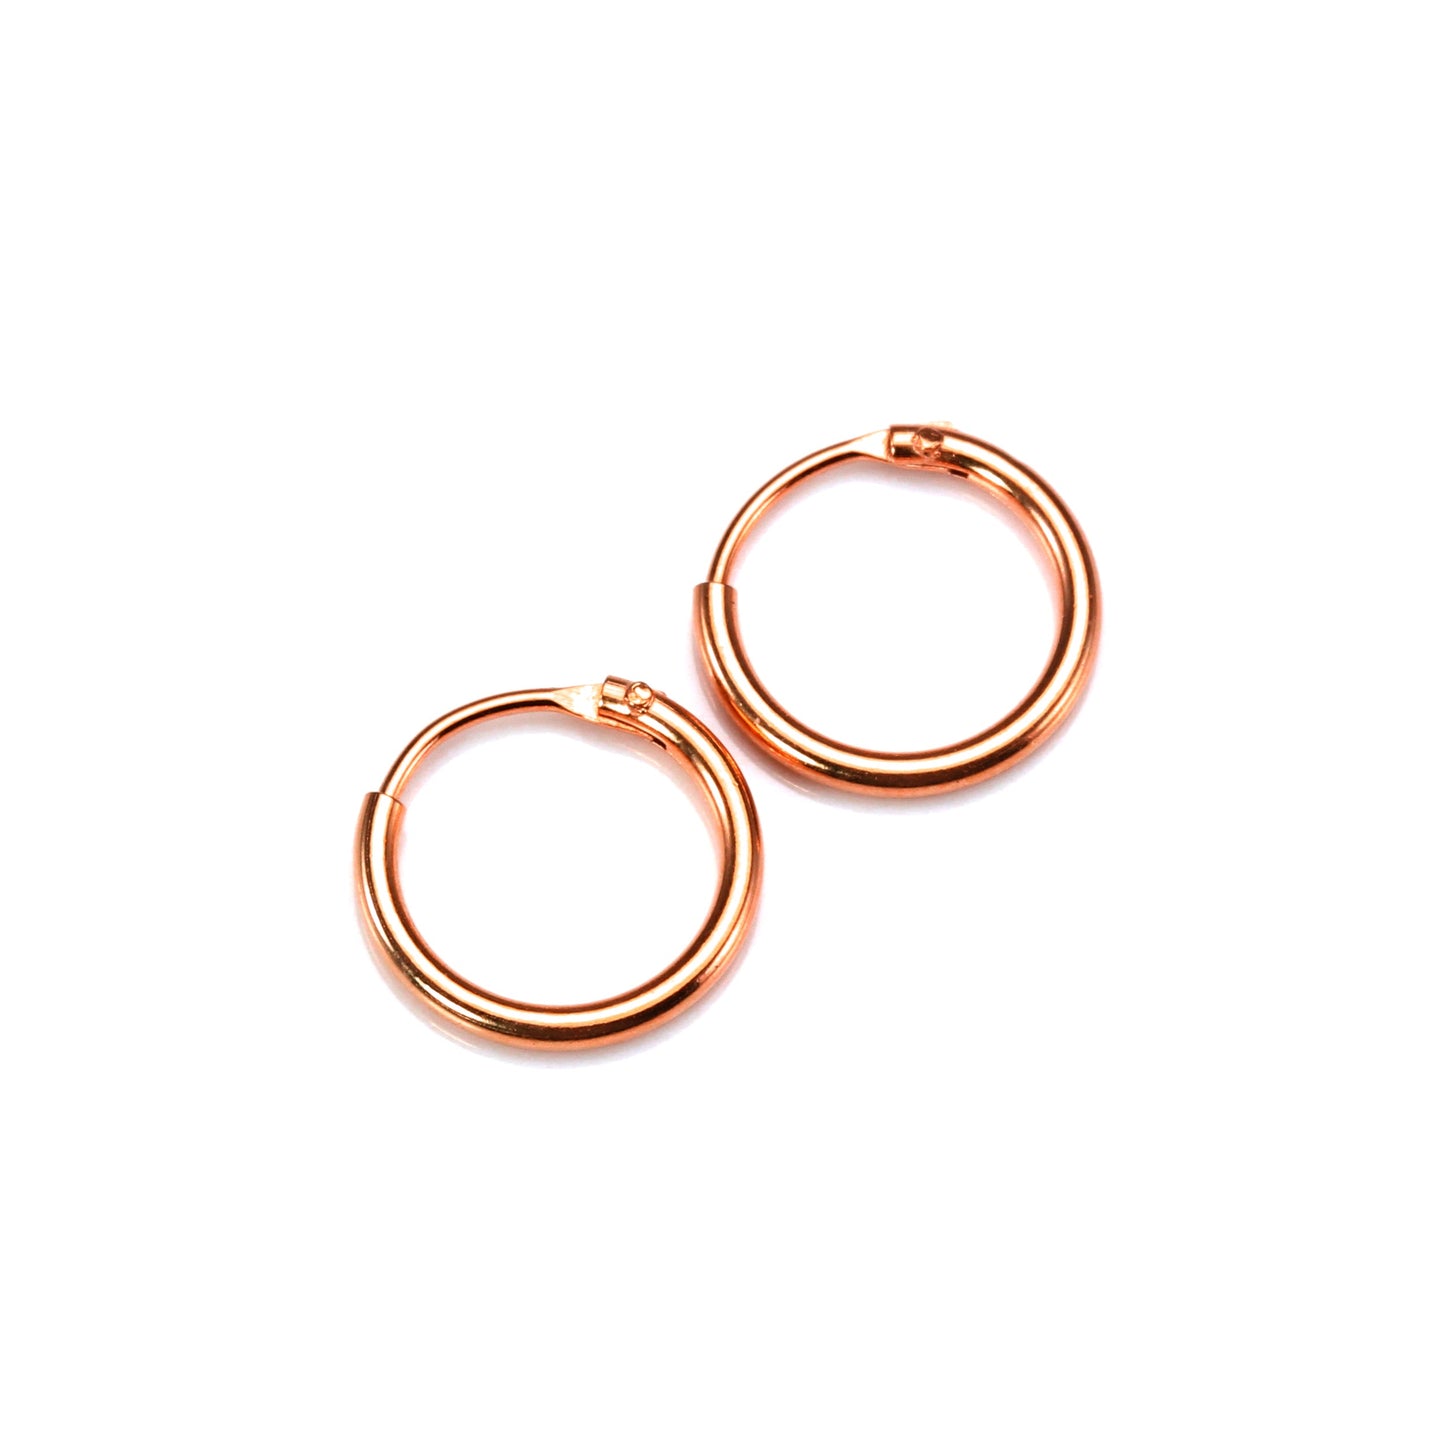 Rose Gold Plated Sterling Silver Lightweight Sleeper Hoops 8mm - 35mm